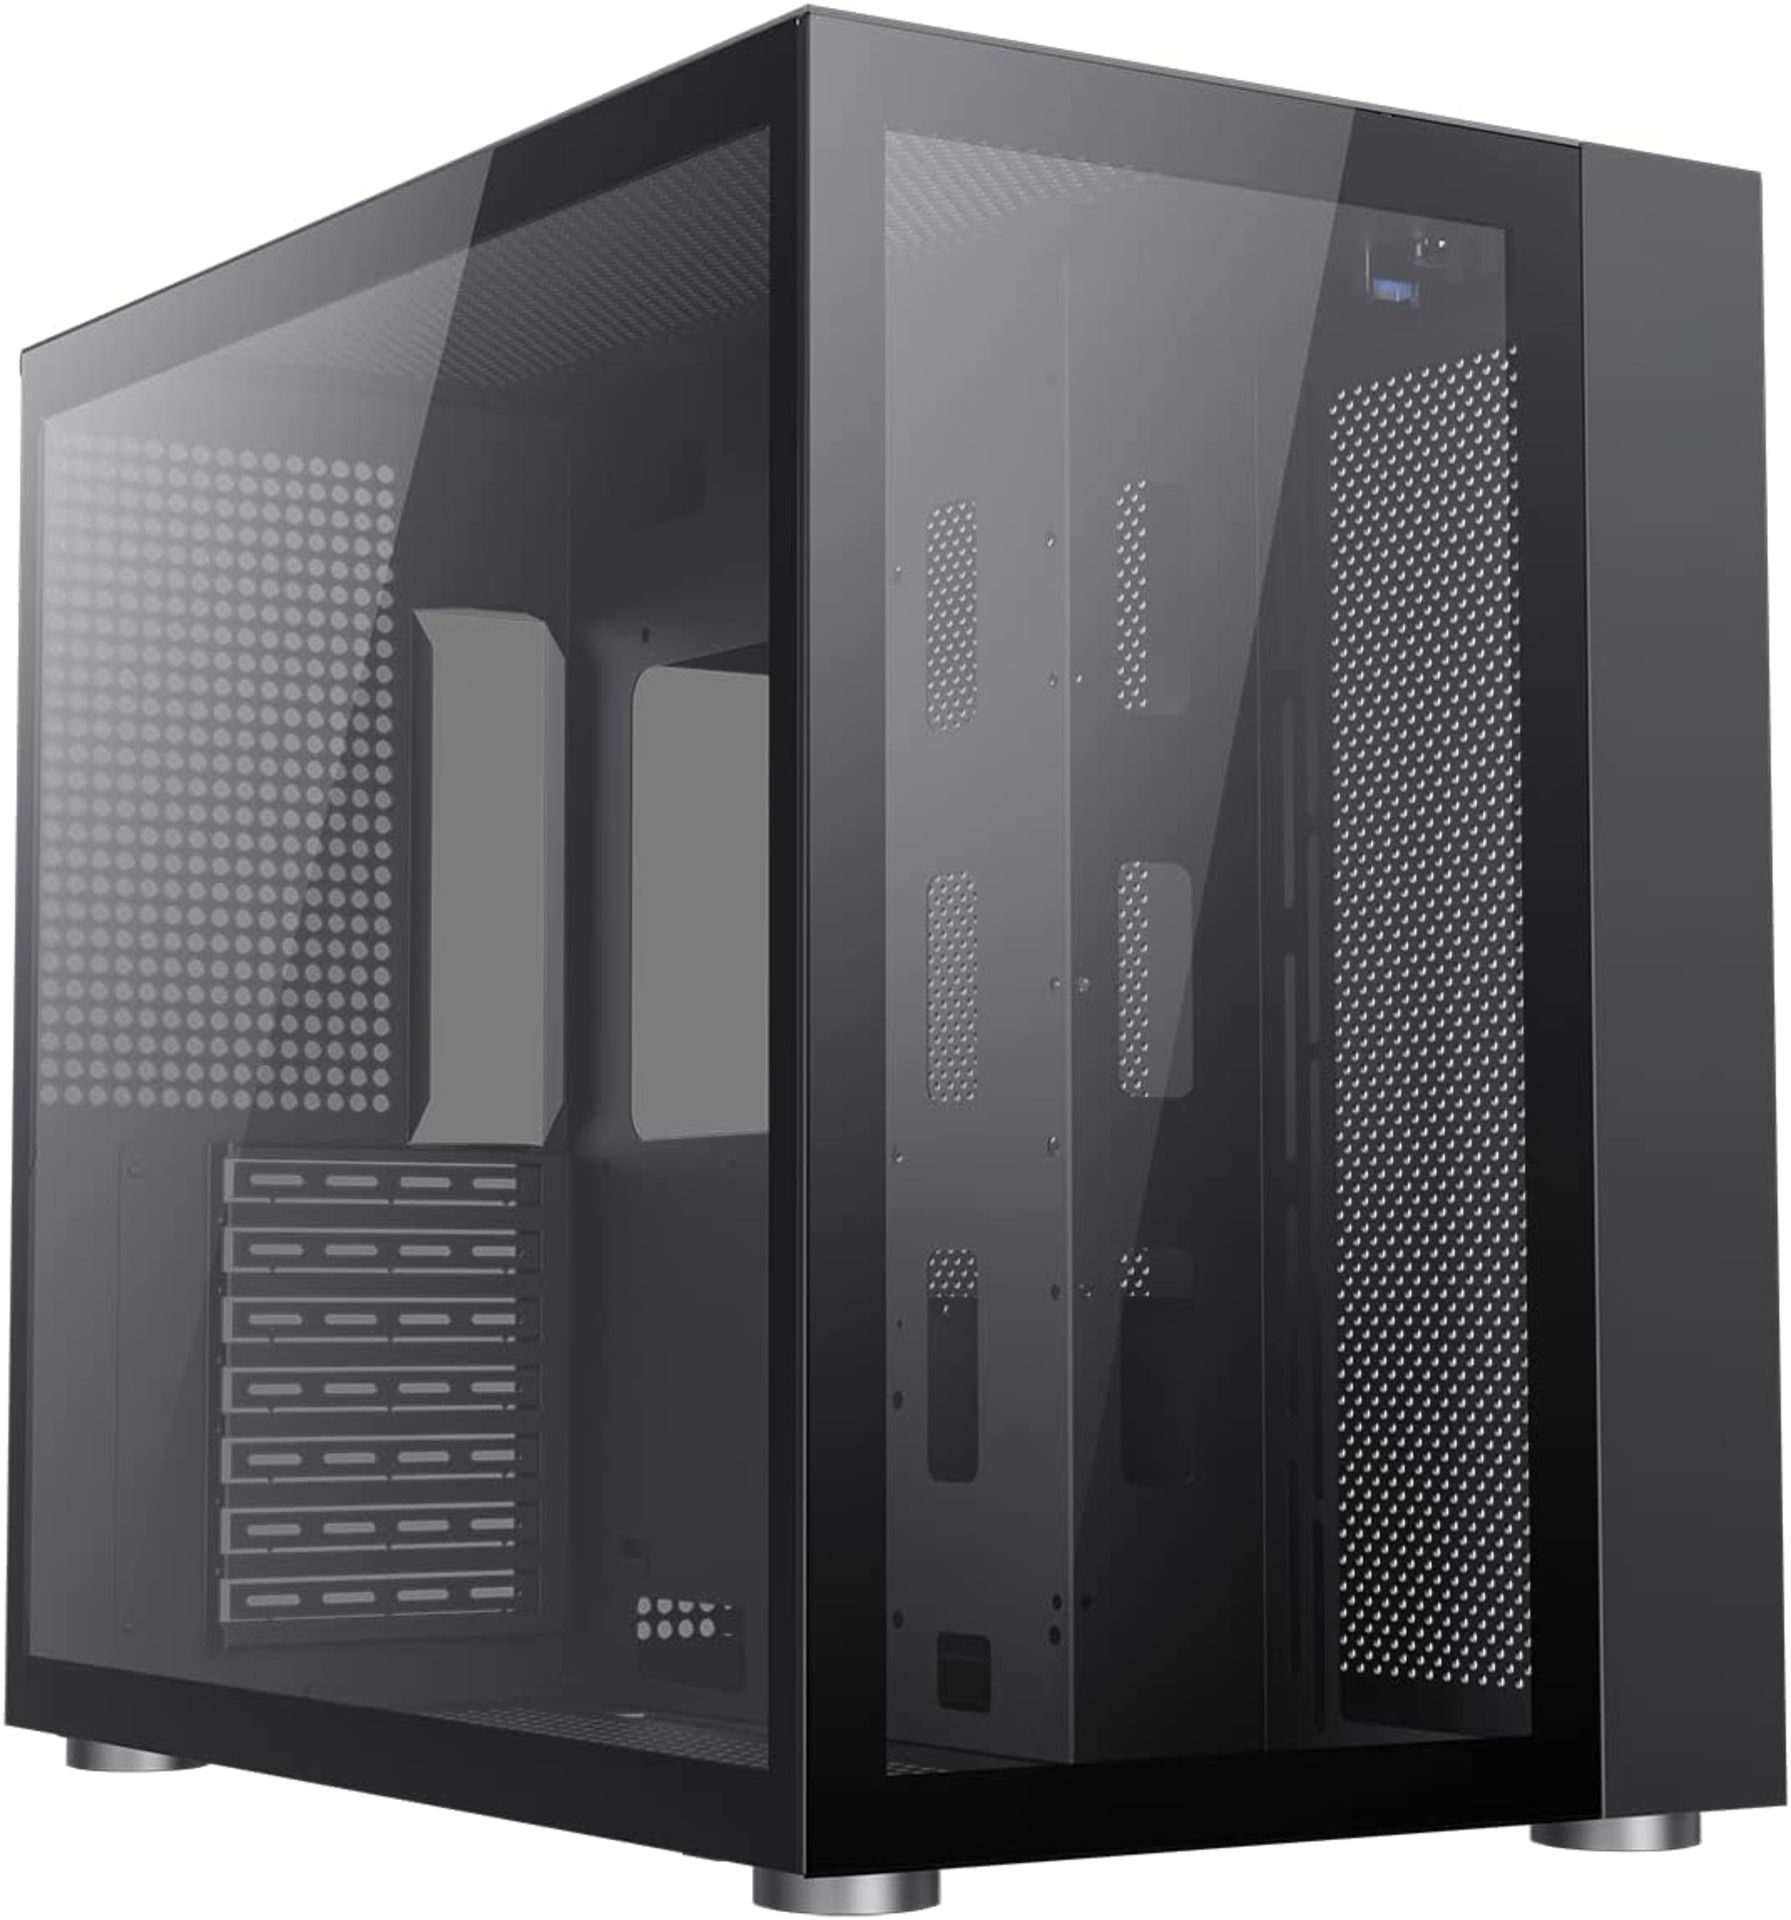 NEW & BOXED GAMEMAX Infinity Tempered Glass Mid-Tower ATX Case - BLACK. RRP £74.99. Stand out with